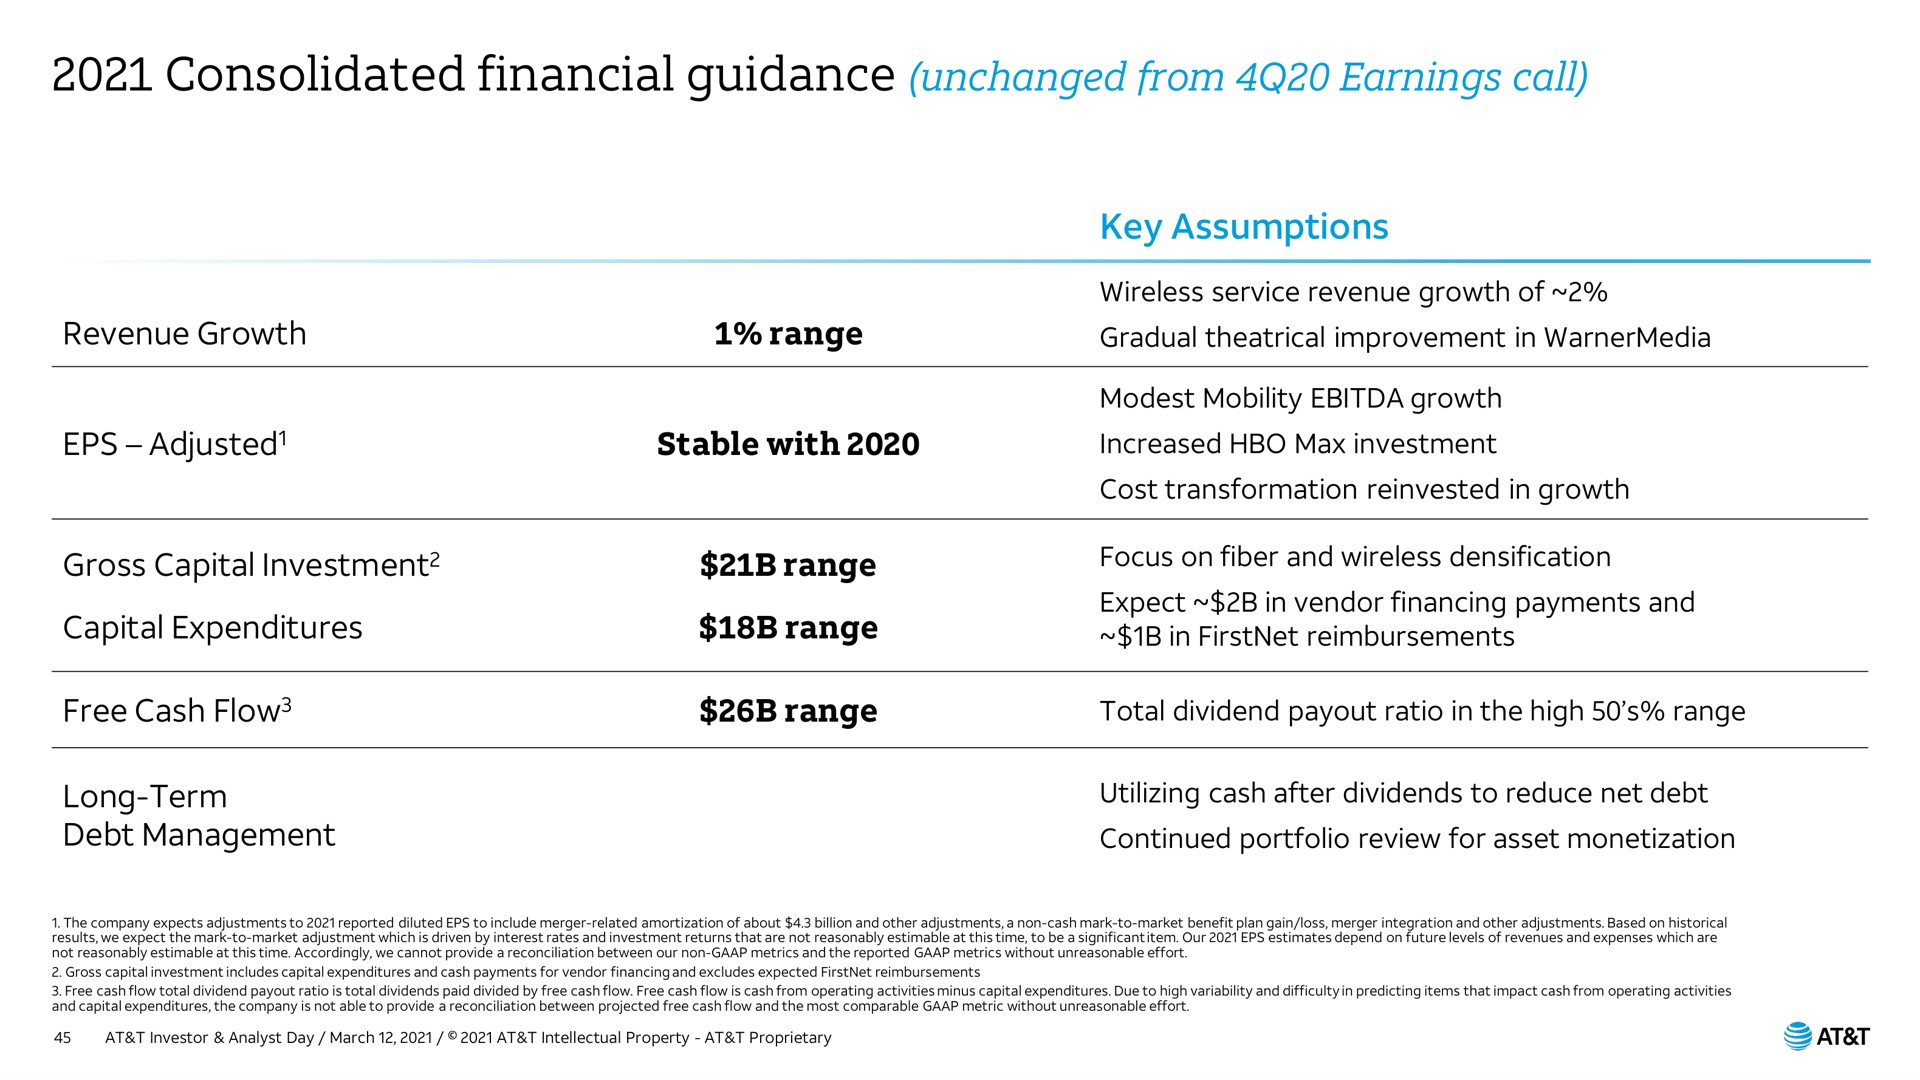 consolidated financial guidance unchanged from earnings call | AT&T